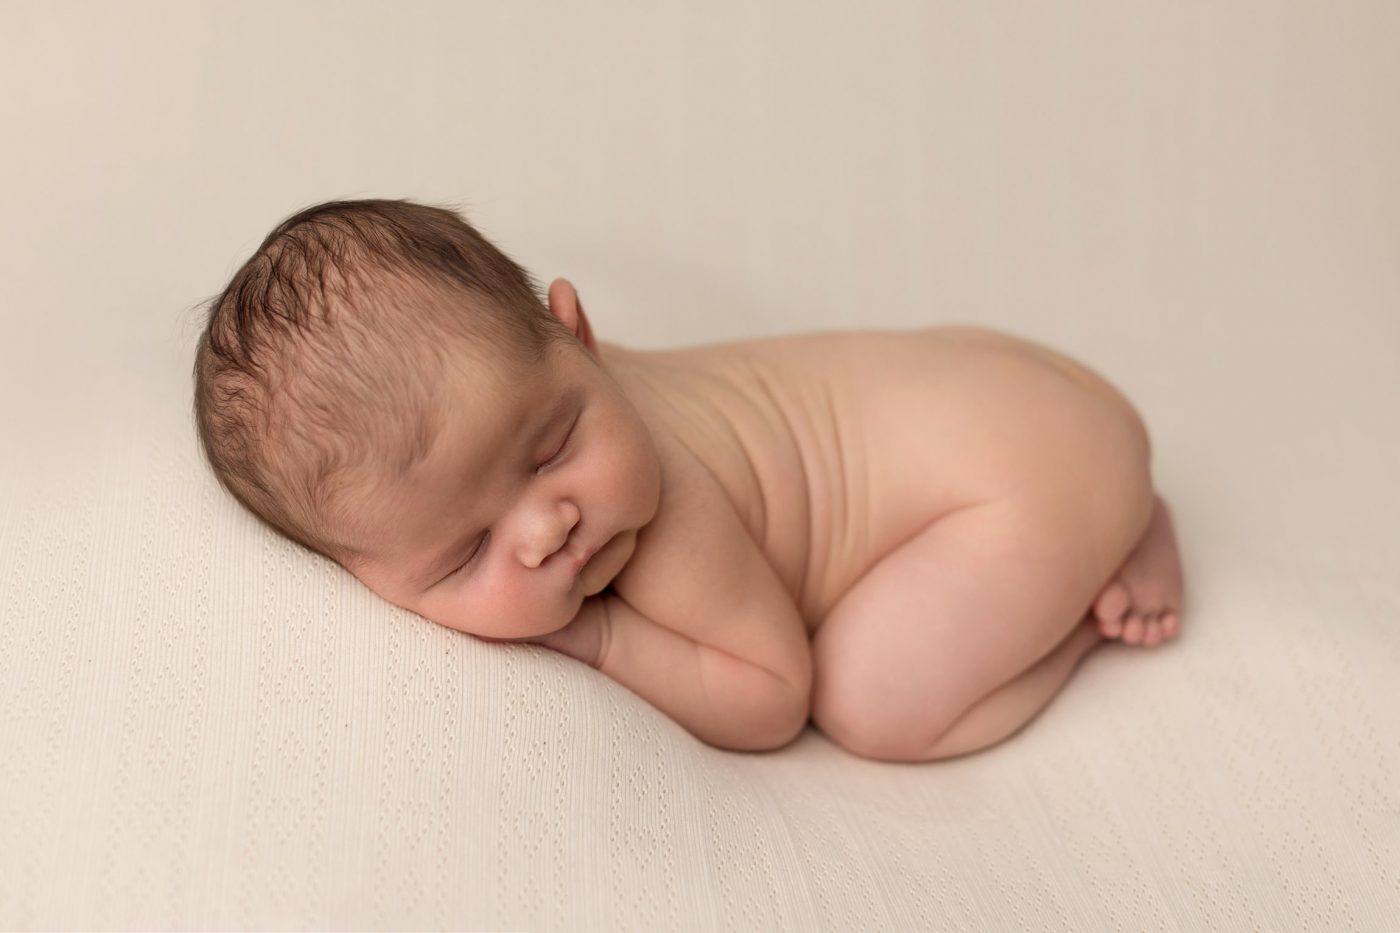 newborn baby curled up, laying on cream blanket